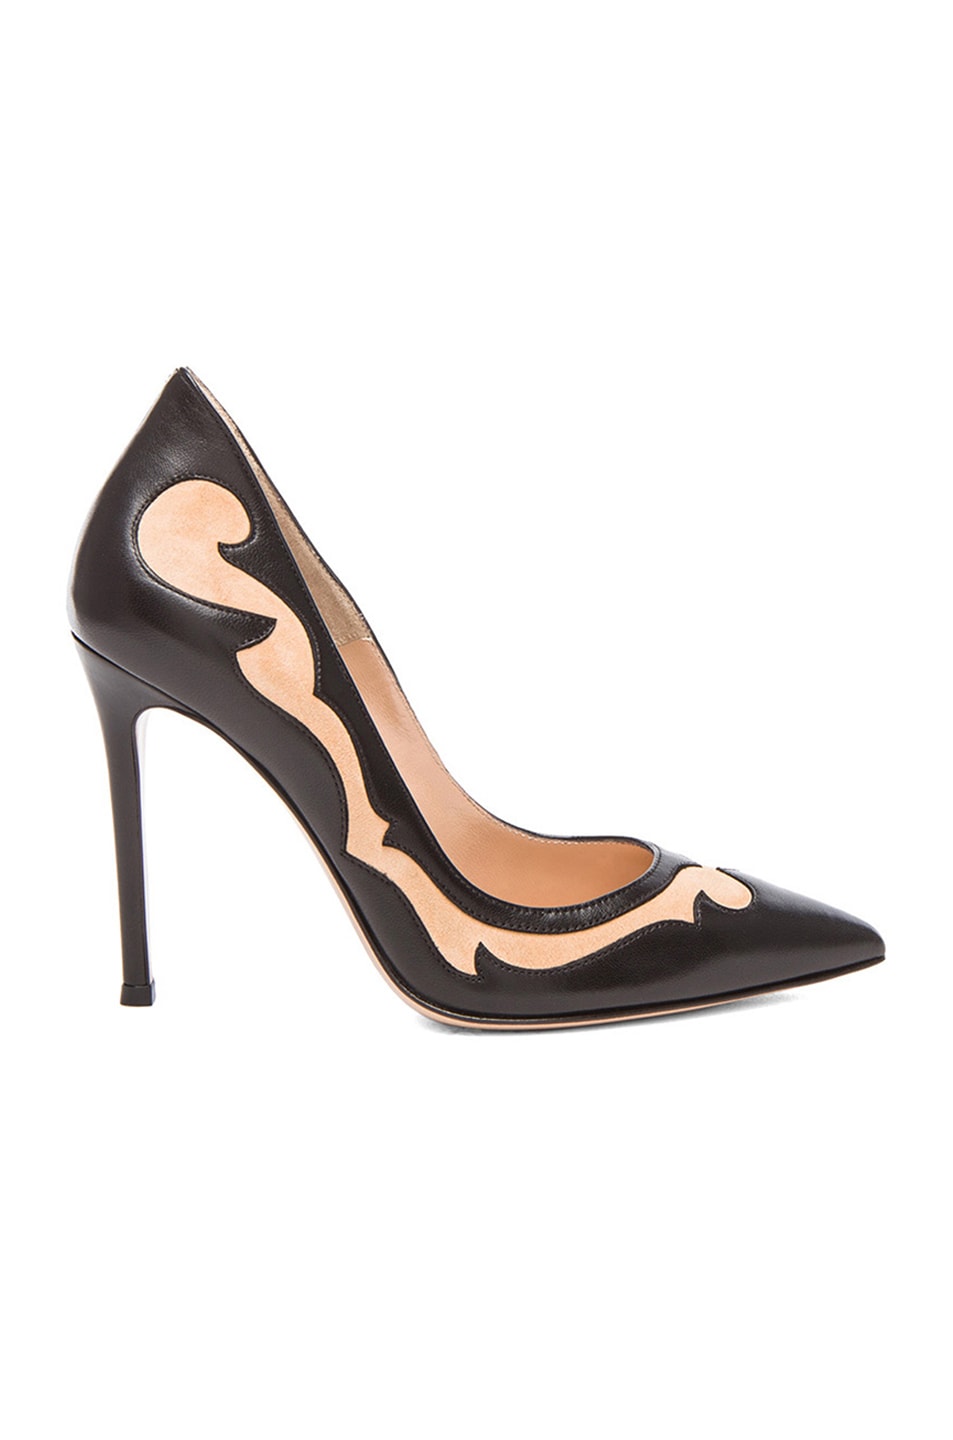 Gianvito Rossi Two Toned Western Leather Pumps in Nero & Powder | FWRD